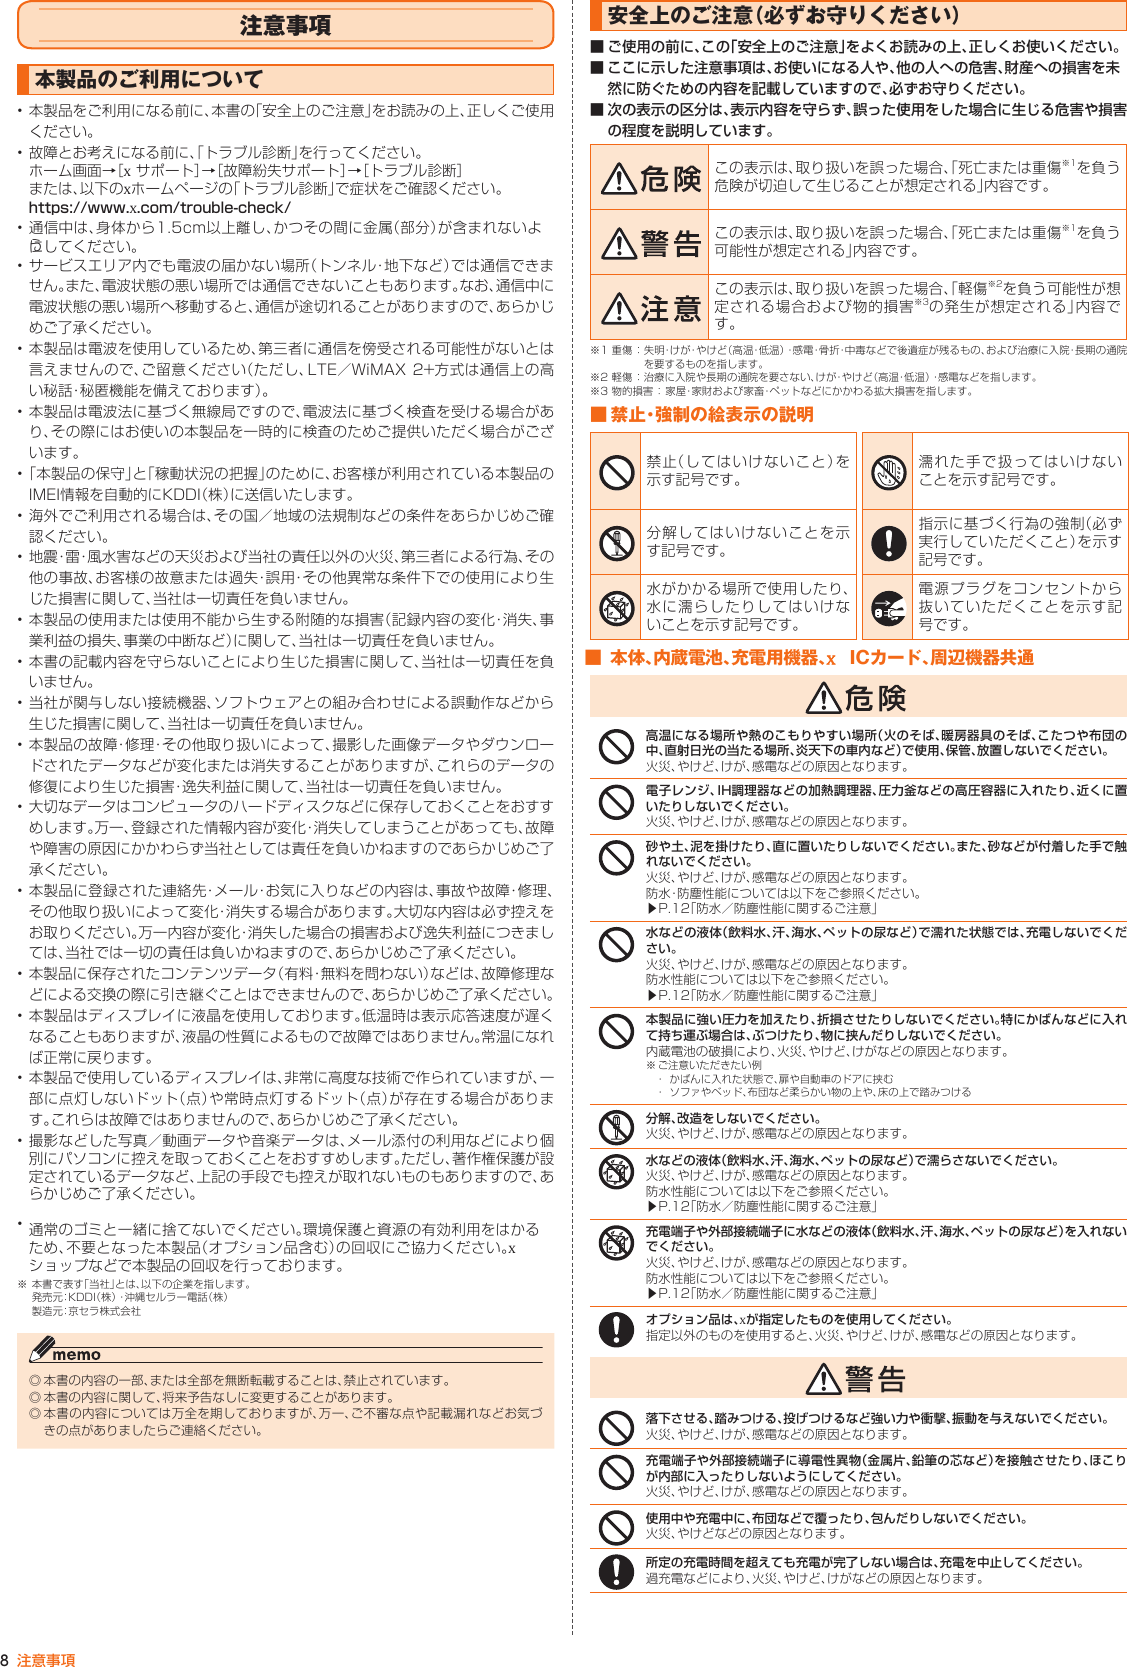 Page 8 of Kyocera FA51 Tablet User Manual part 2